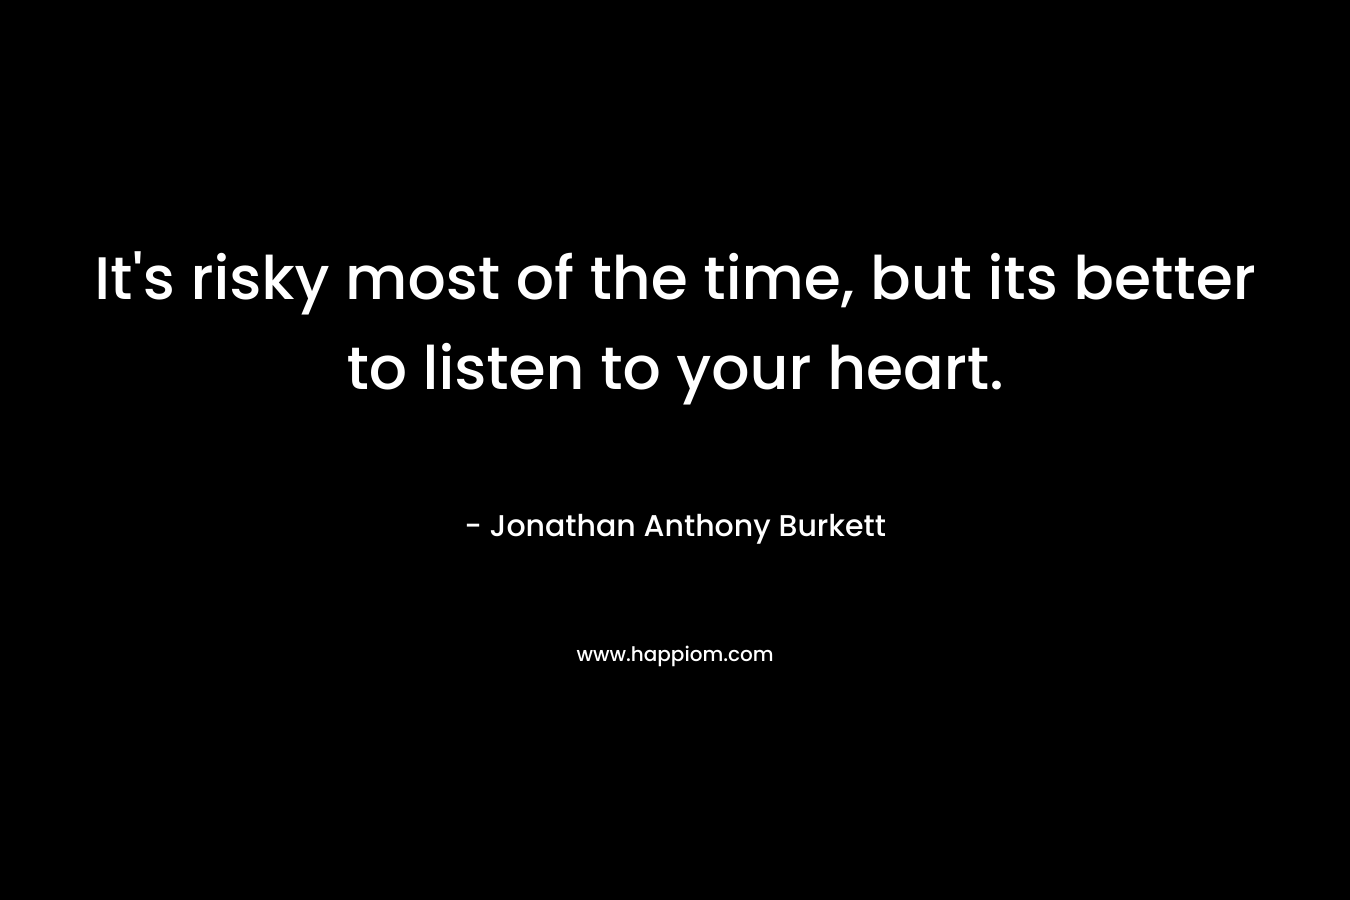 It's risky most of the time, but its better to listen to your heart.